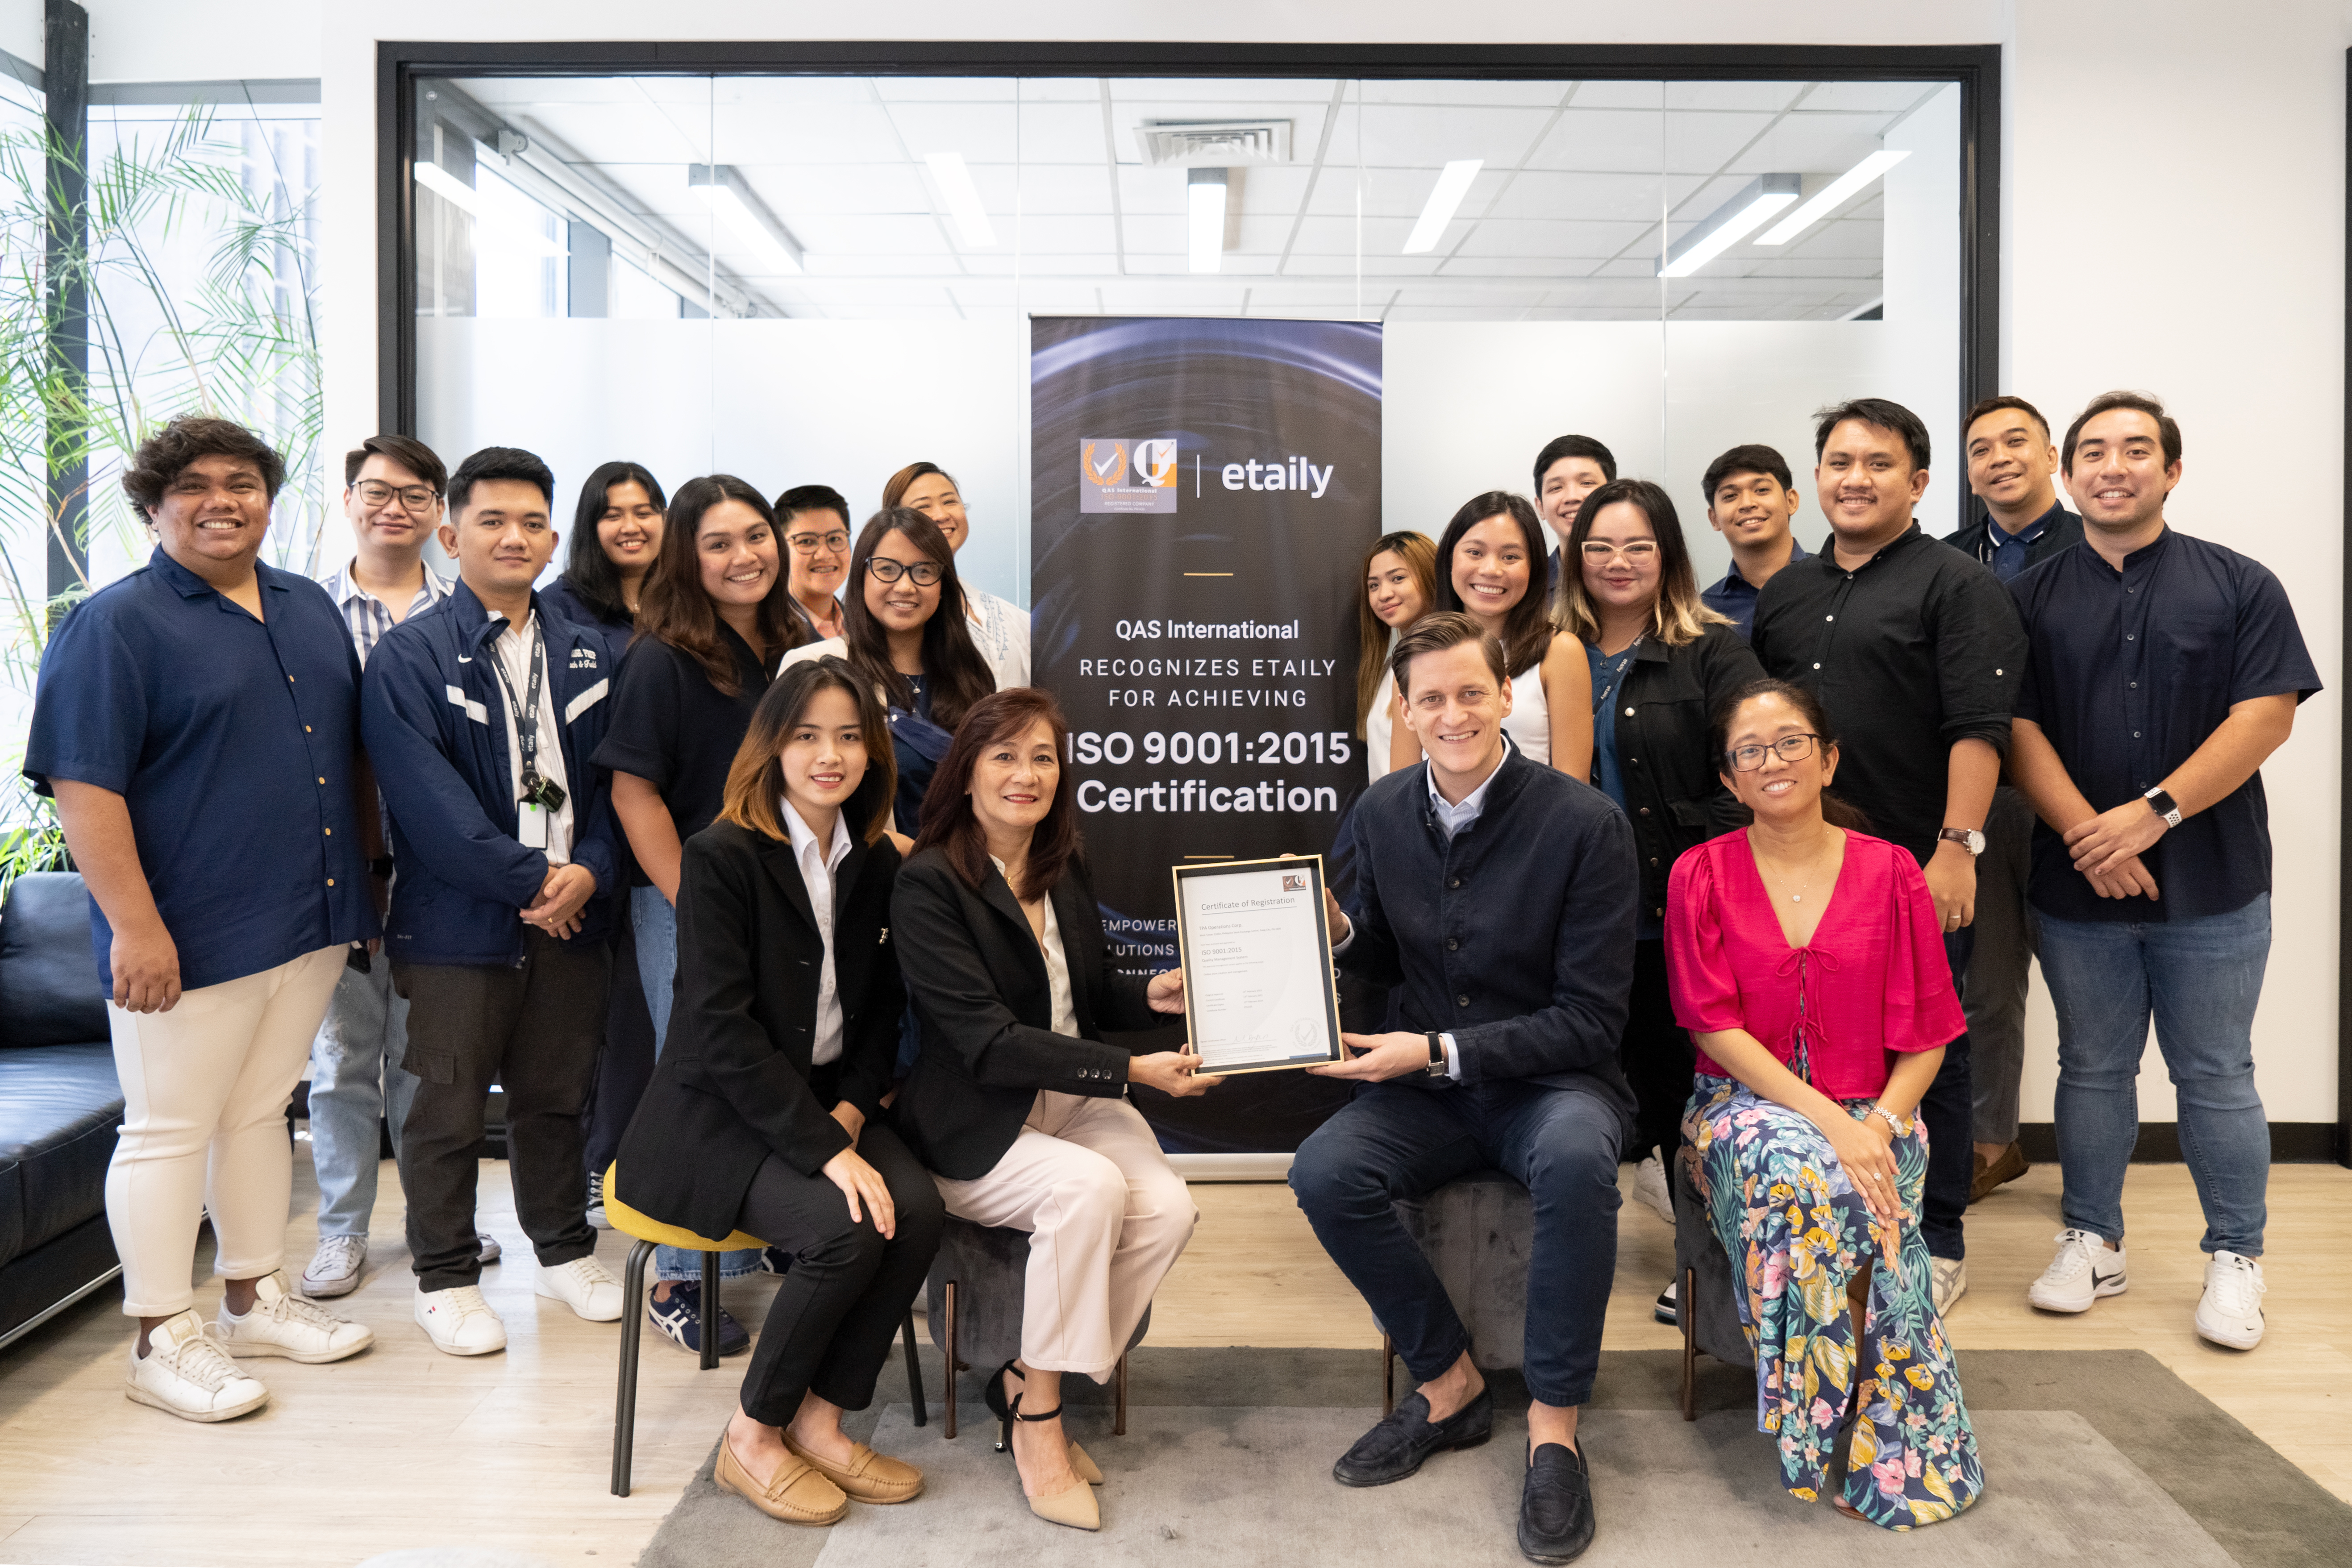 Etaily Achieves ISO 9001:2015 Certification for Online Store Creation and Management